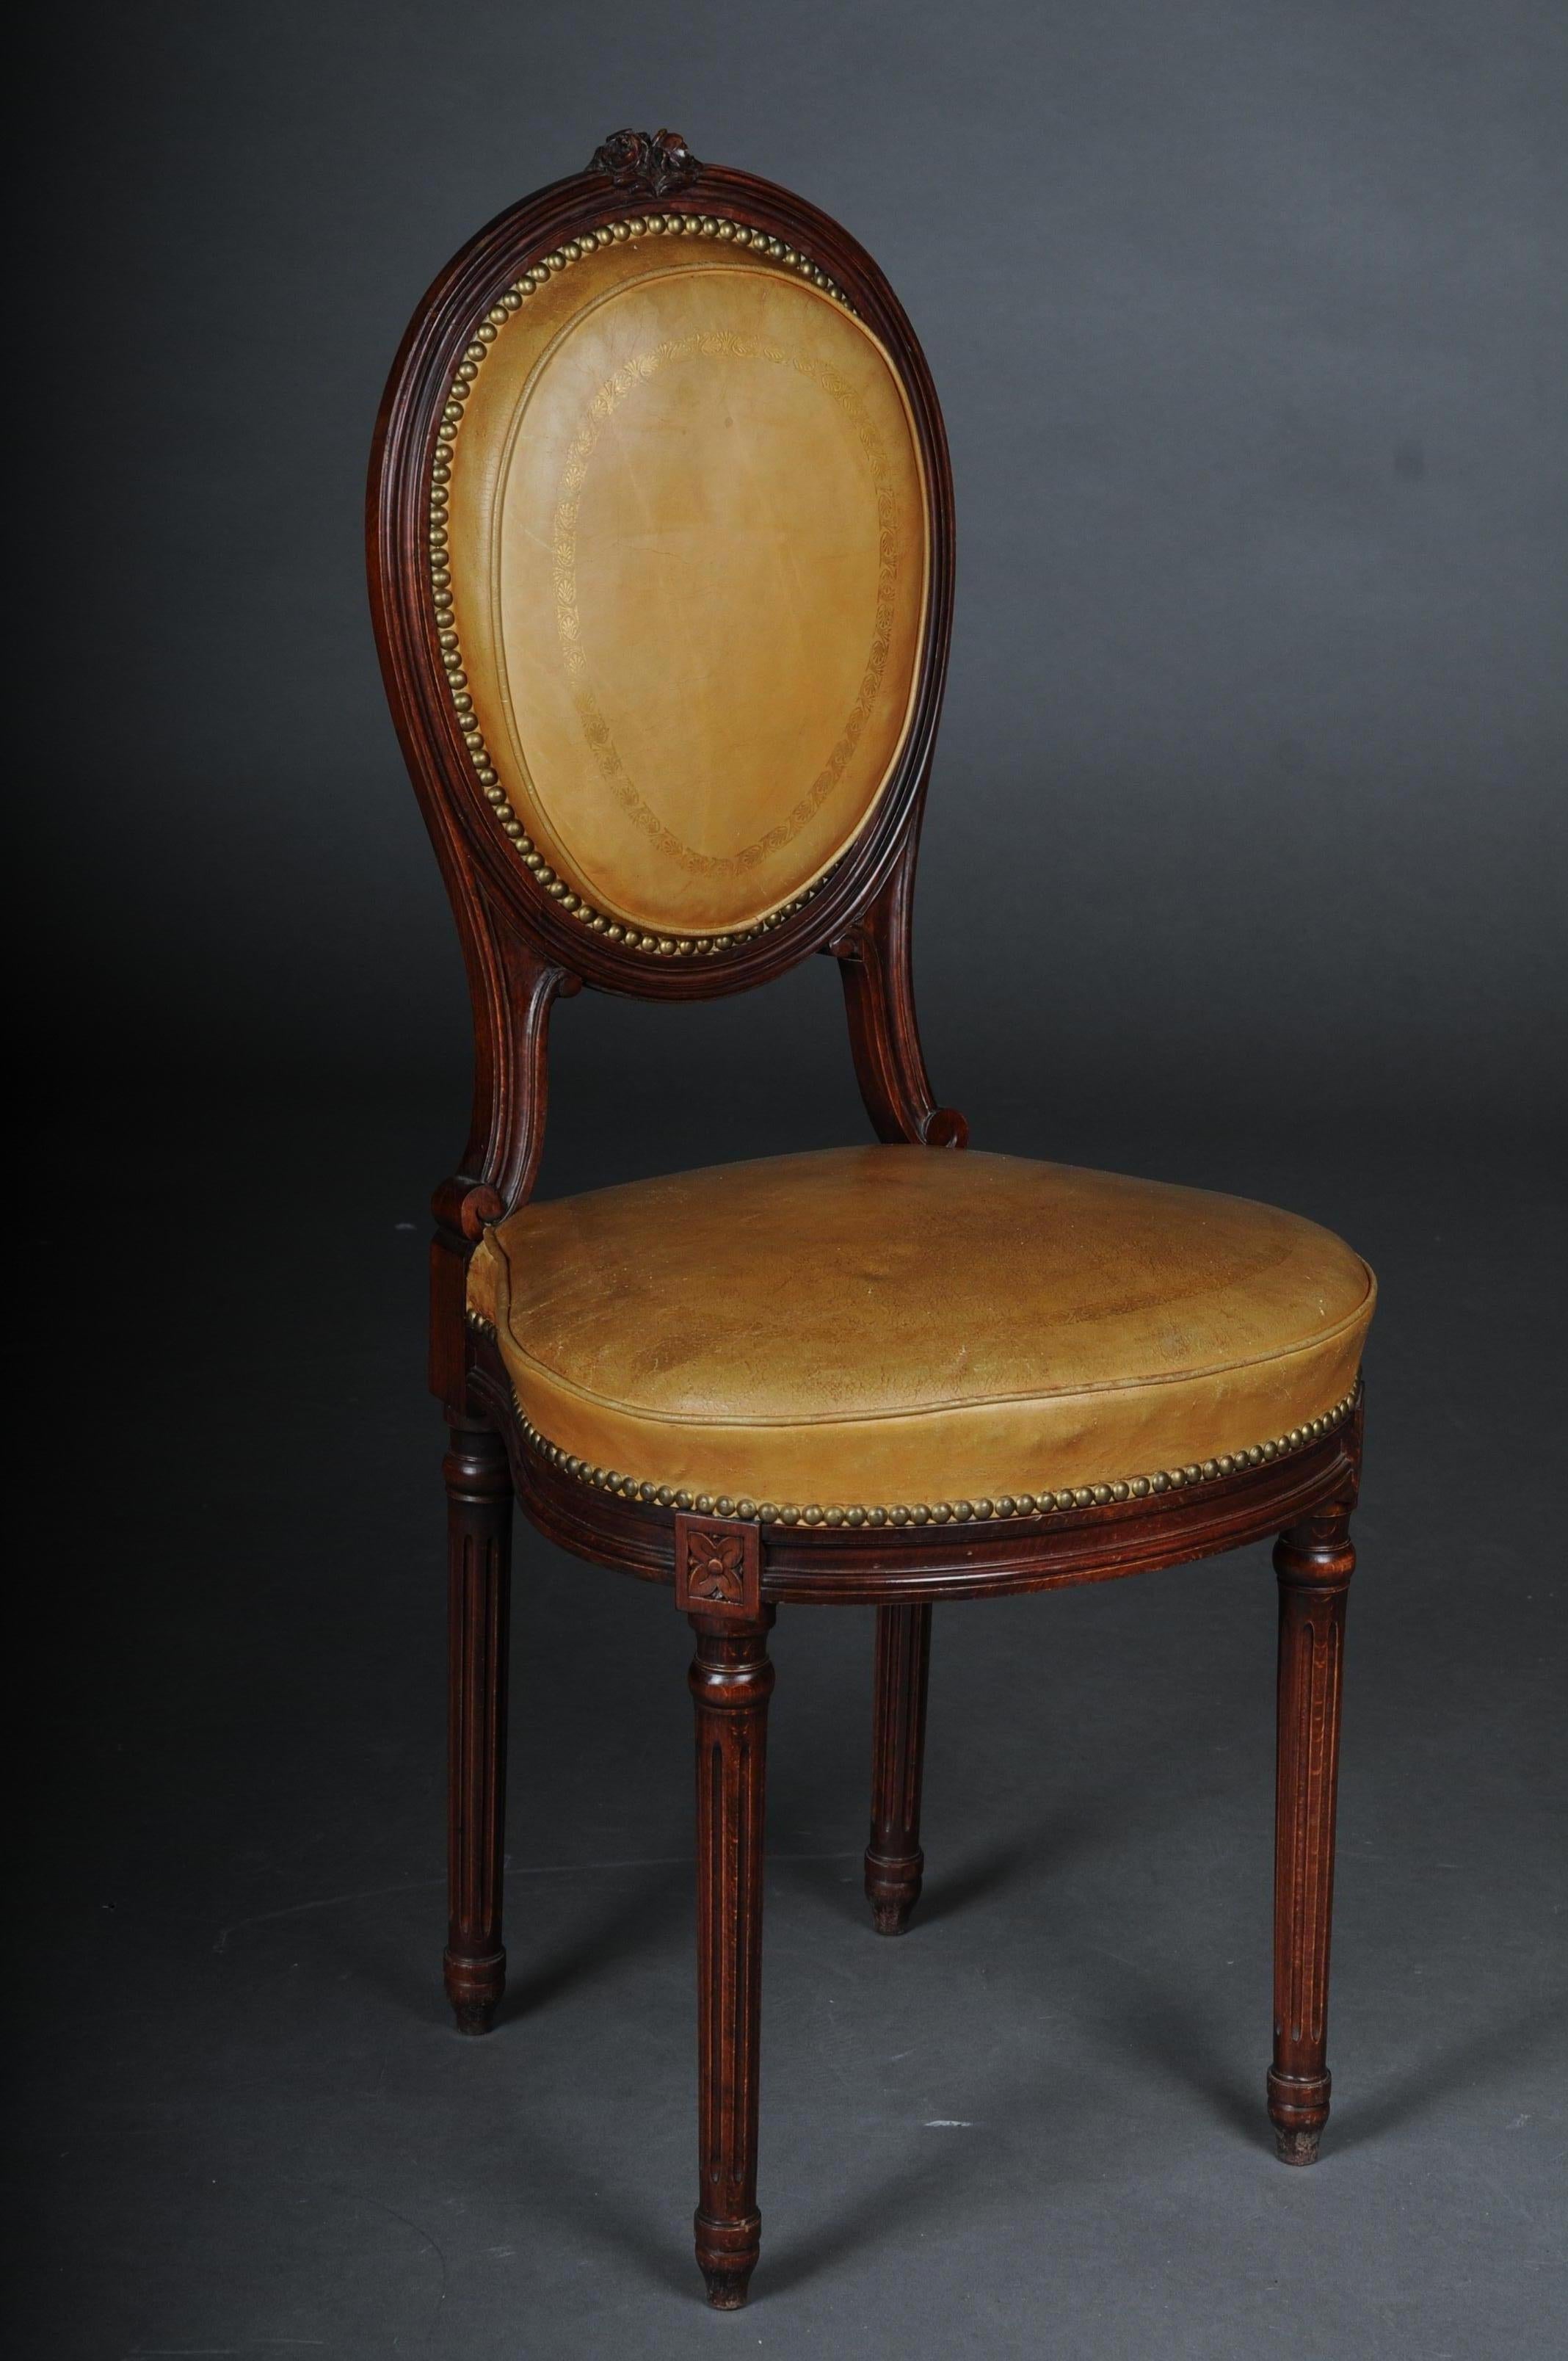 Beautiful Louis XVI salon chair, France, around 1920

Solid wood frame stained in mahogany. Medallion-shaped seat and backrest frame covered with yellow leather. Long, fluted legs. . Extremely high quality. The seat and backrest are finished with